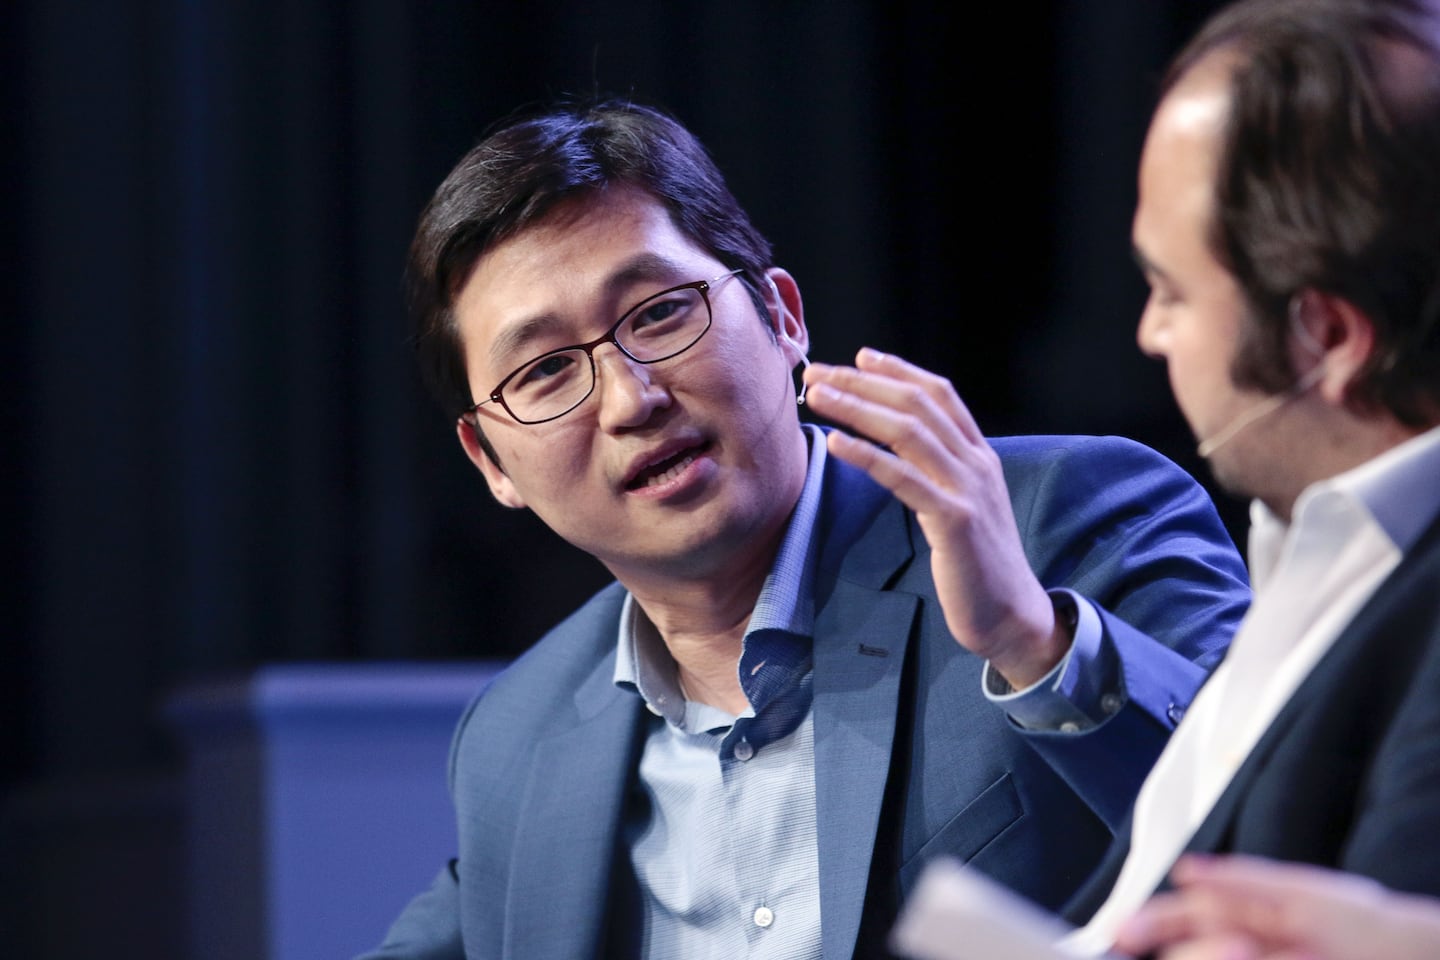 Kim Bom-seok, also known as Bom Kim, founder and chief executive officer of Coupang, speaks during the Milken Institute Global Conference in California in 2019. Getty Images.